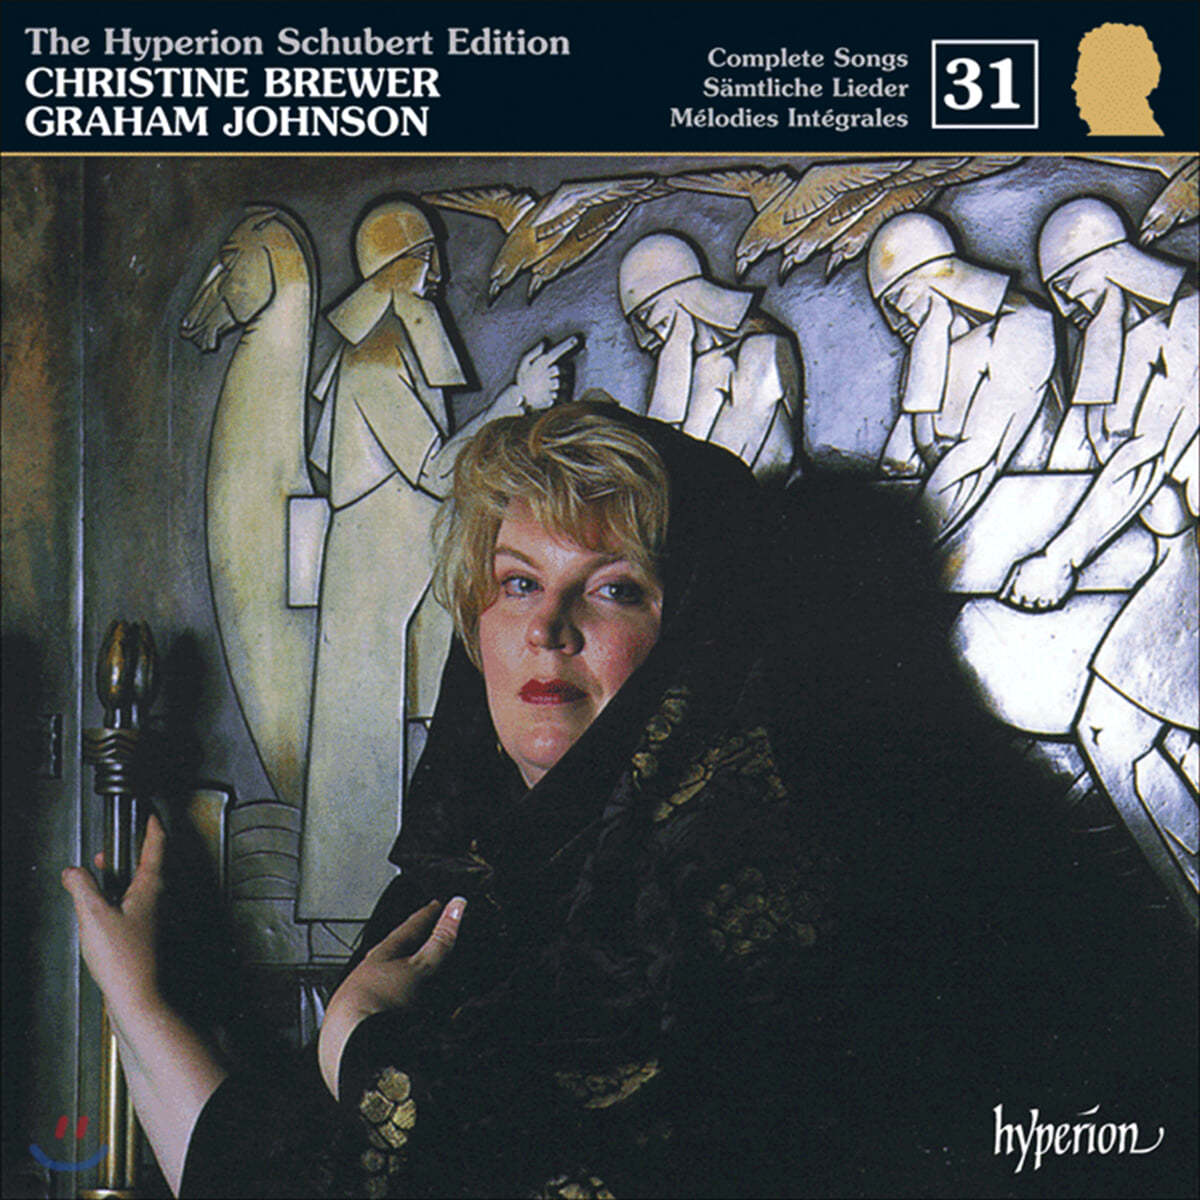 Christine Brewer 슈베르트 에디션 31집 (The Hyperion Schubert Edition - Complete Songs Volume 31)